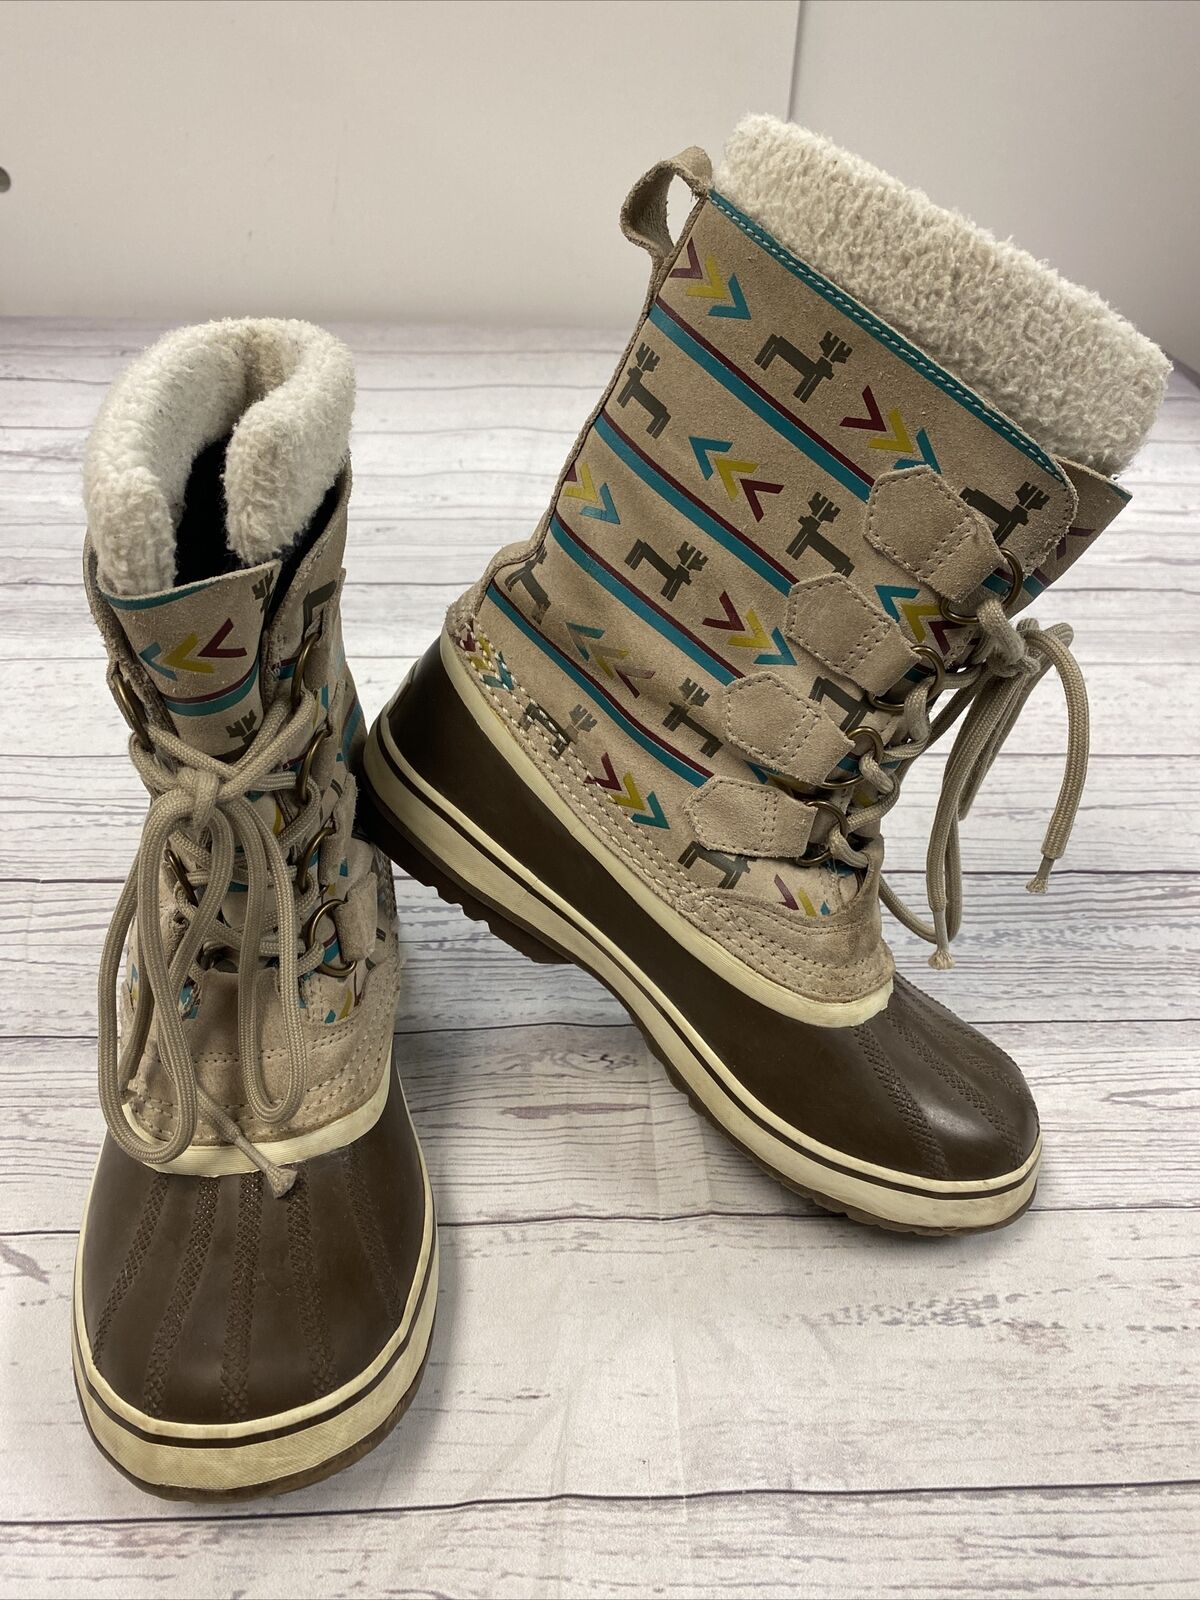 Sorel NL1716-102 Insulated Winter High Boots Aztec Print Suede Women’s Size 8